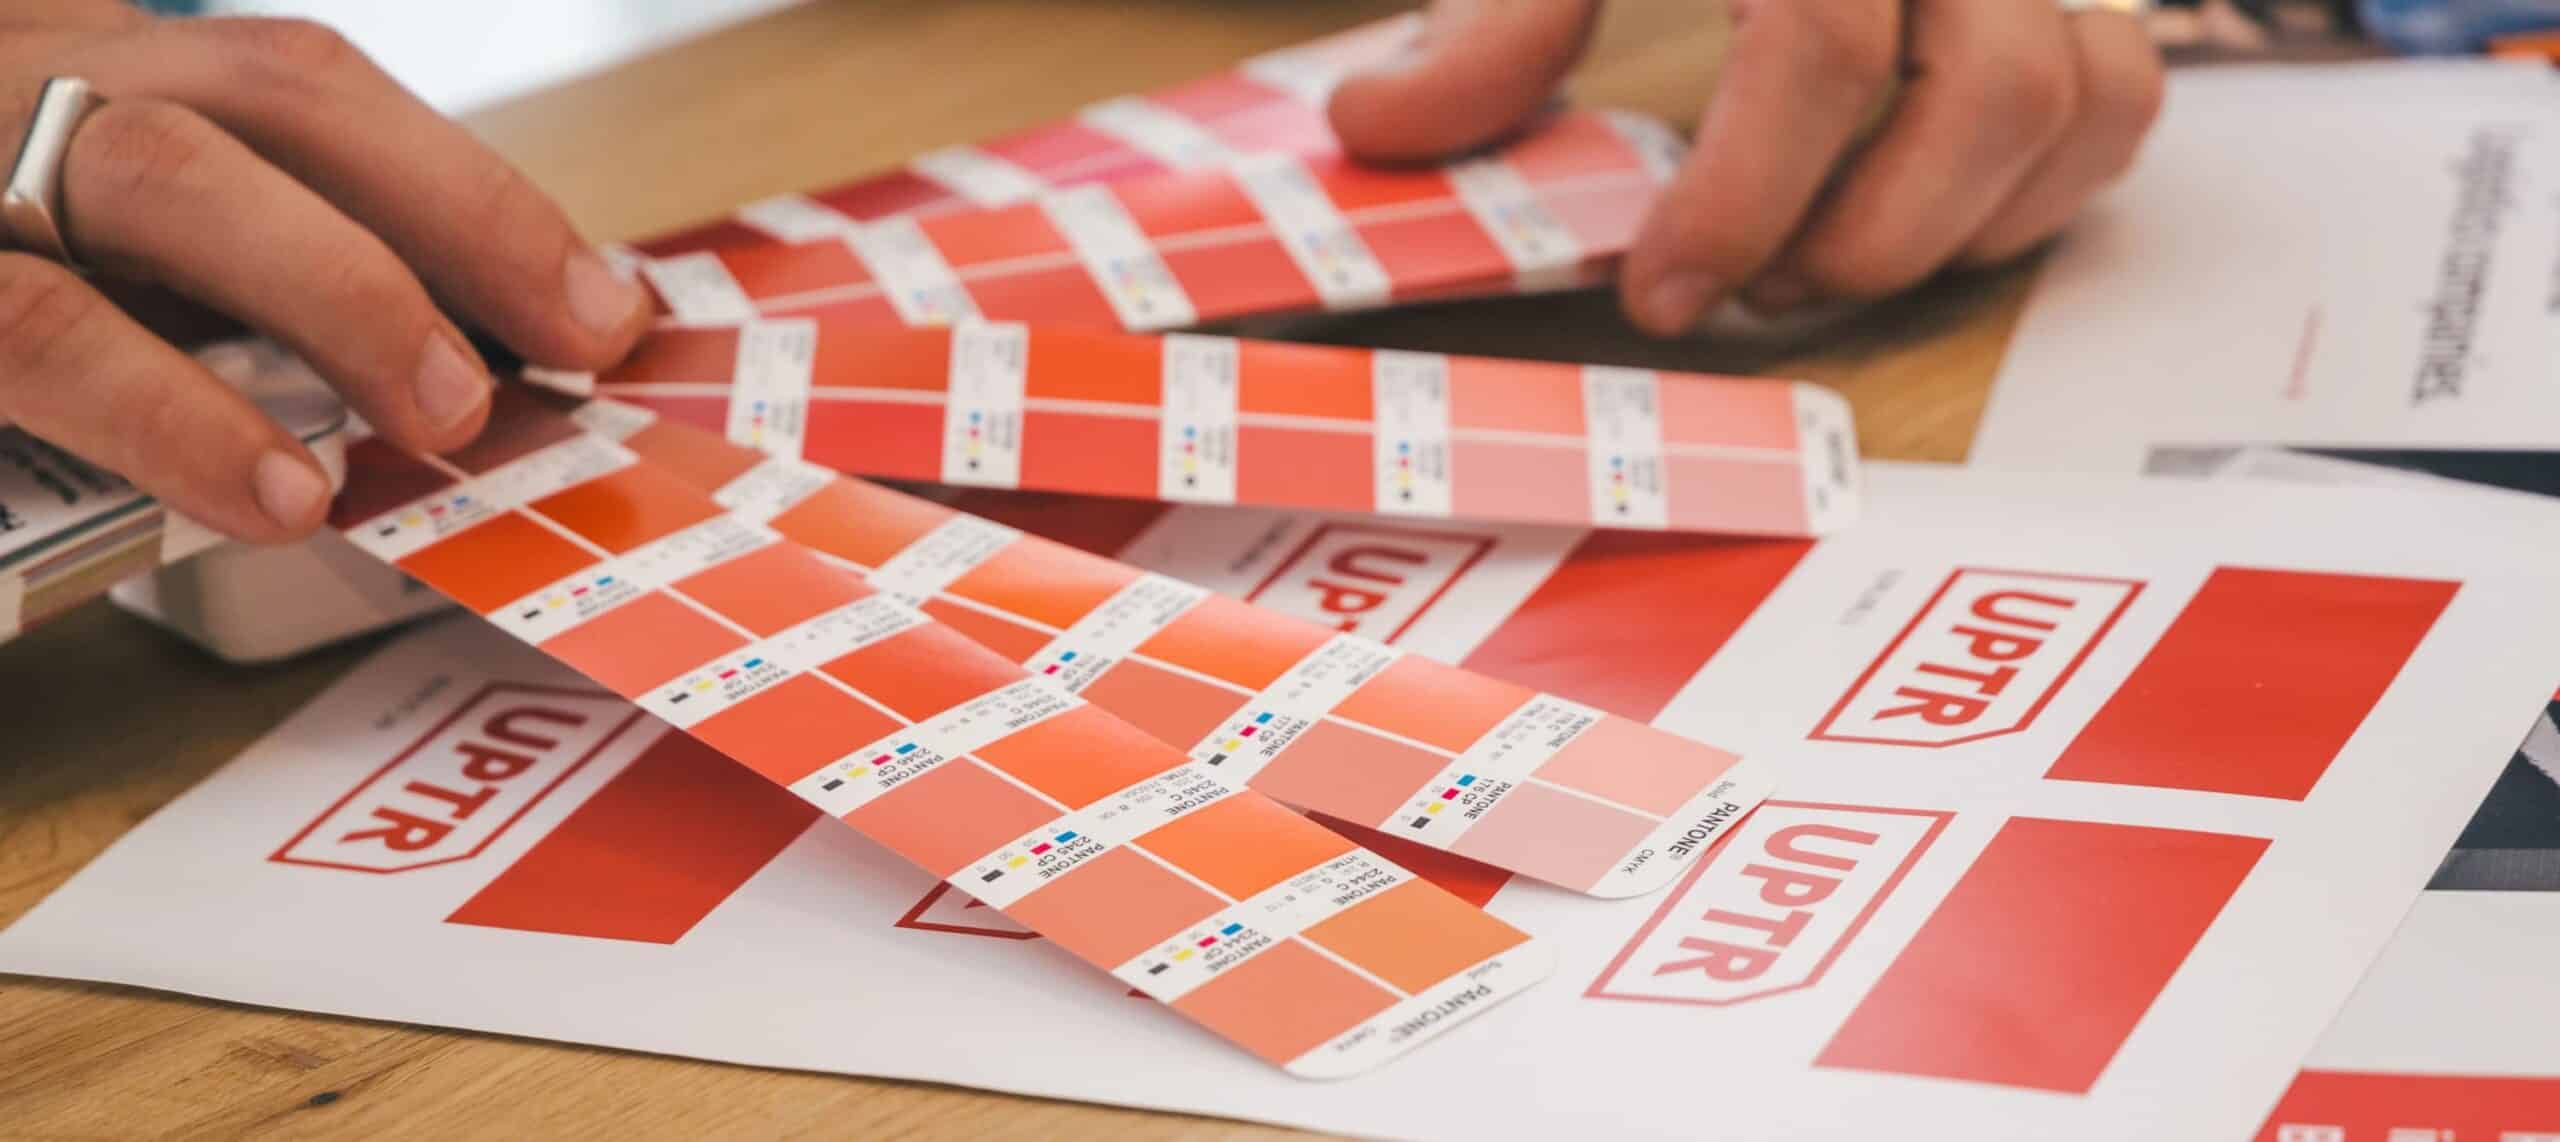 Picture of a man holding Pantone color swatch looking at red shades